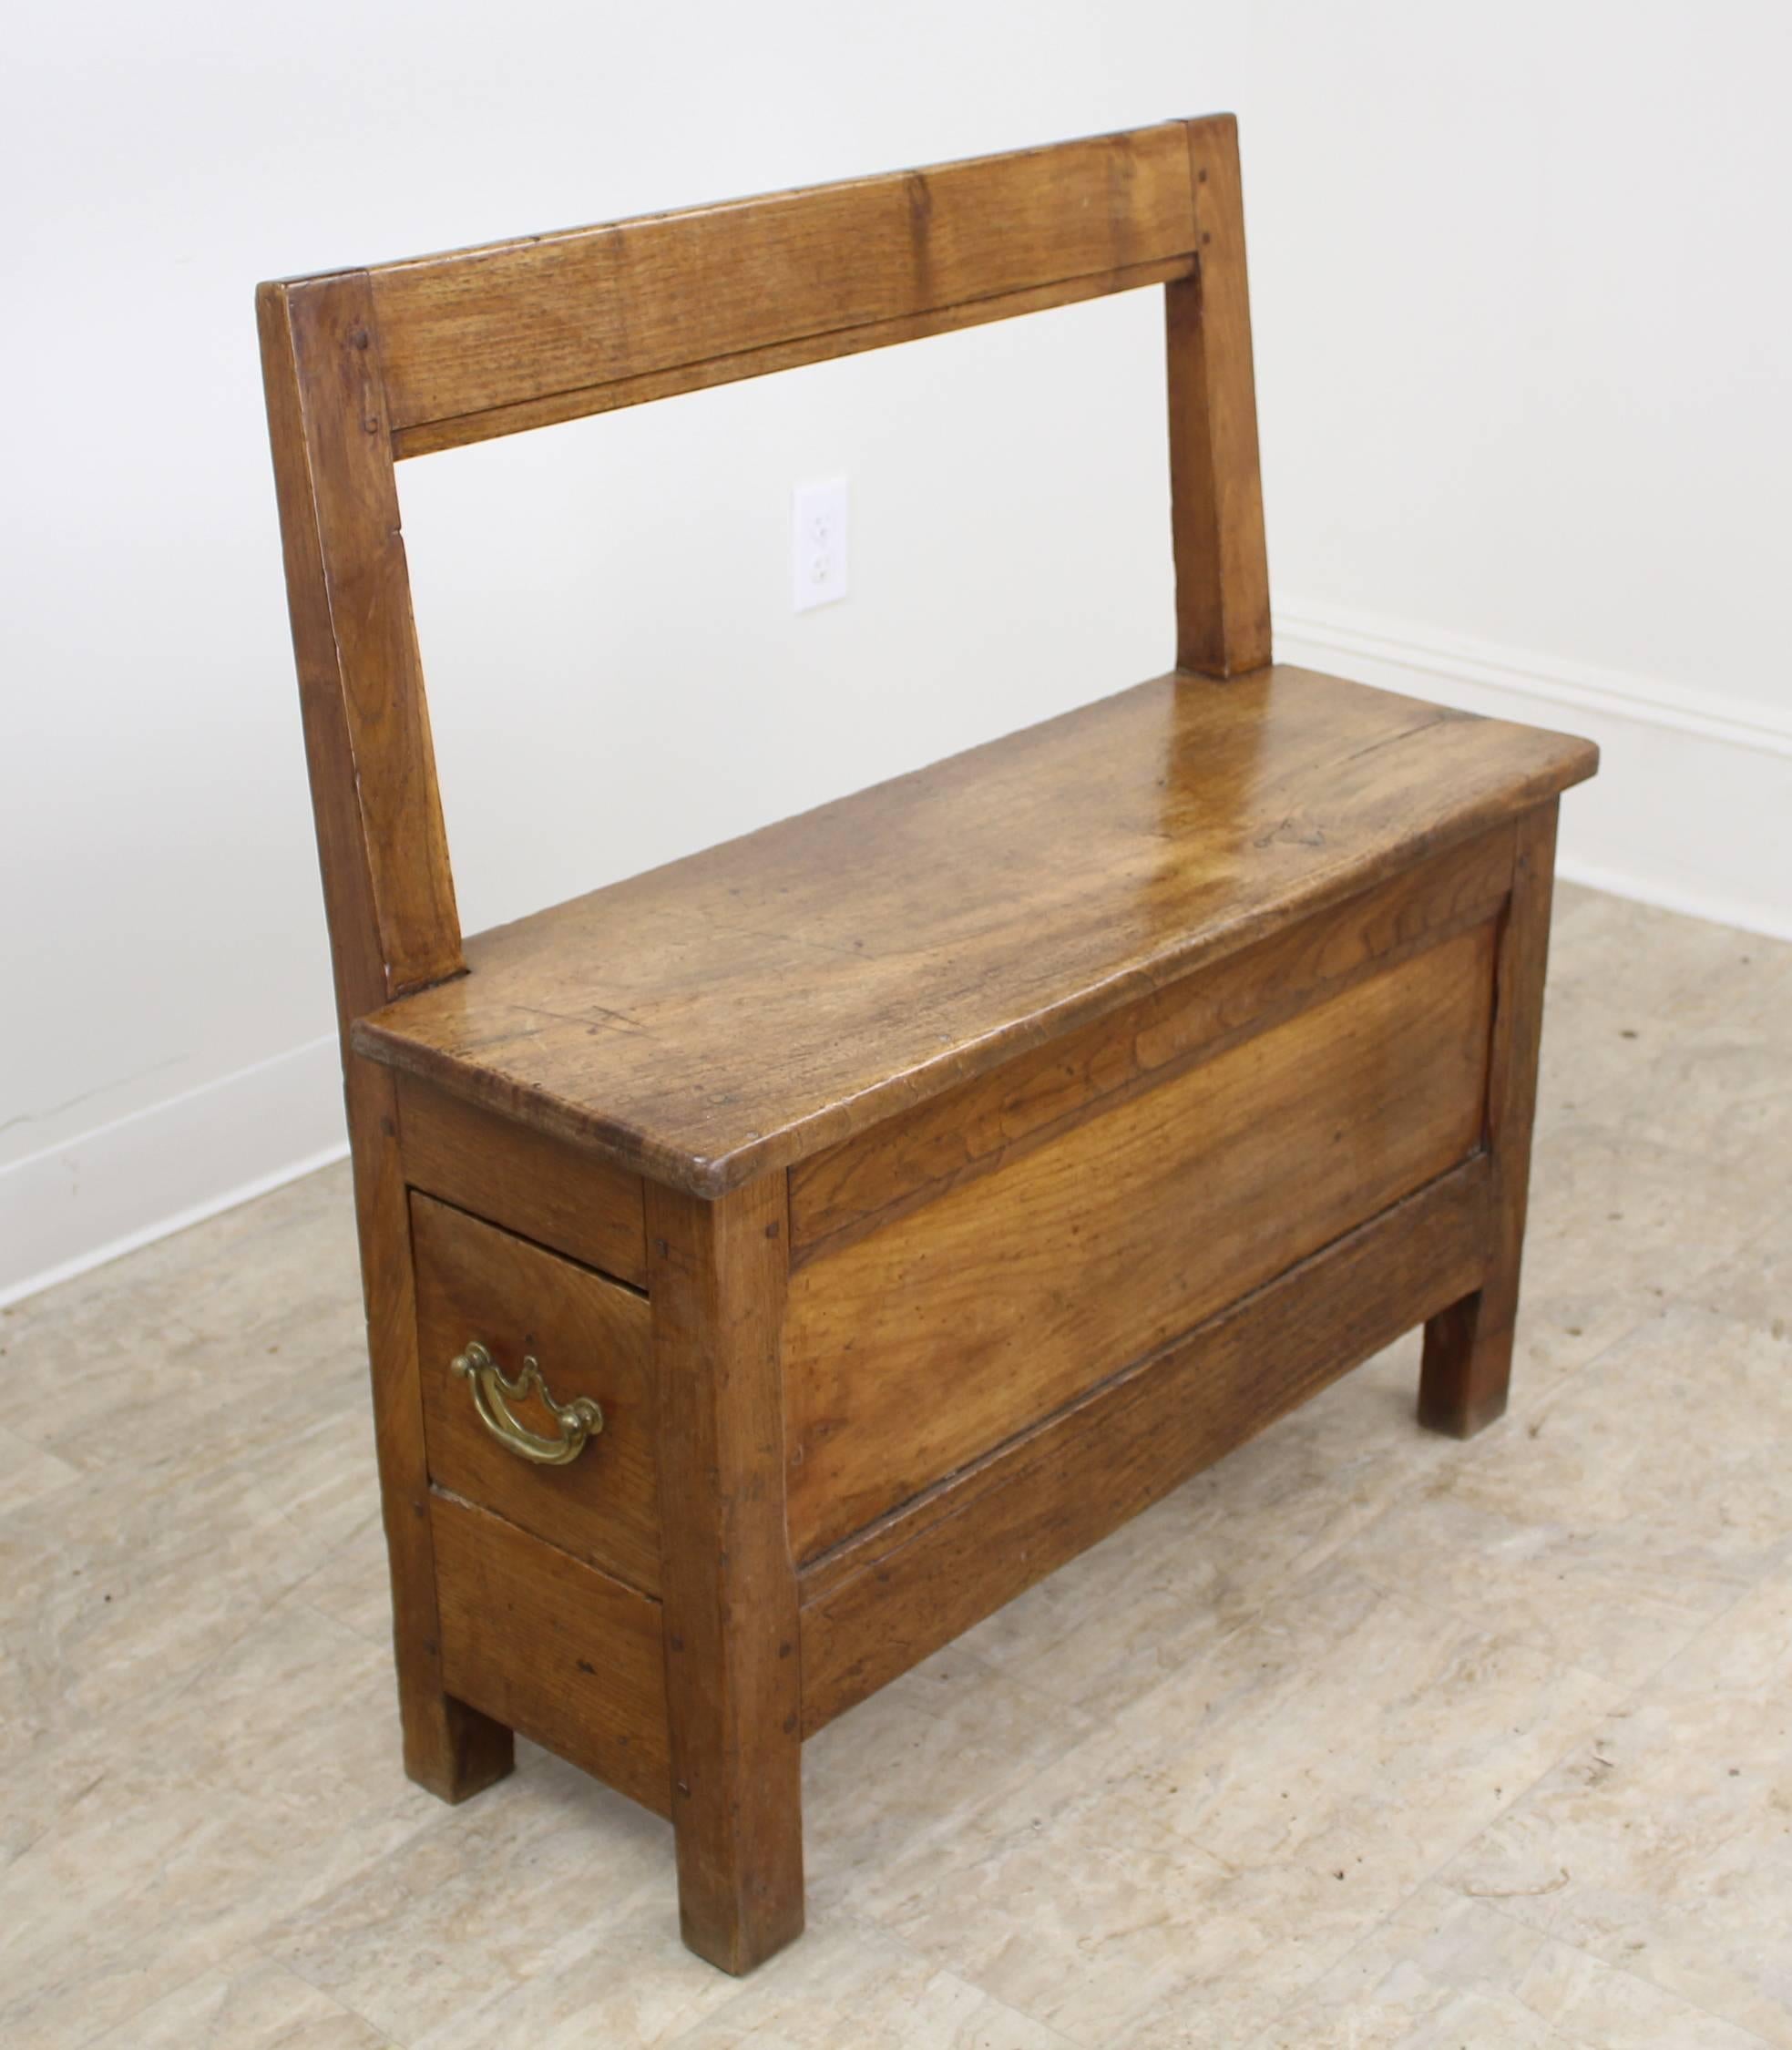 Antique Chestnut Seat with Small Drawer 1